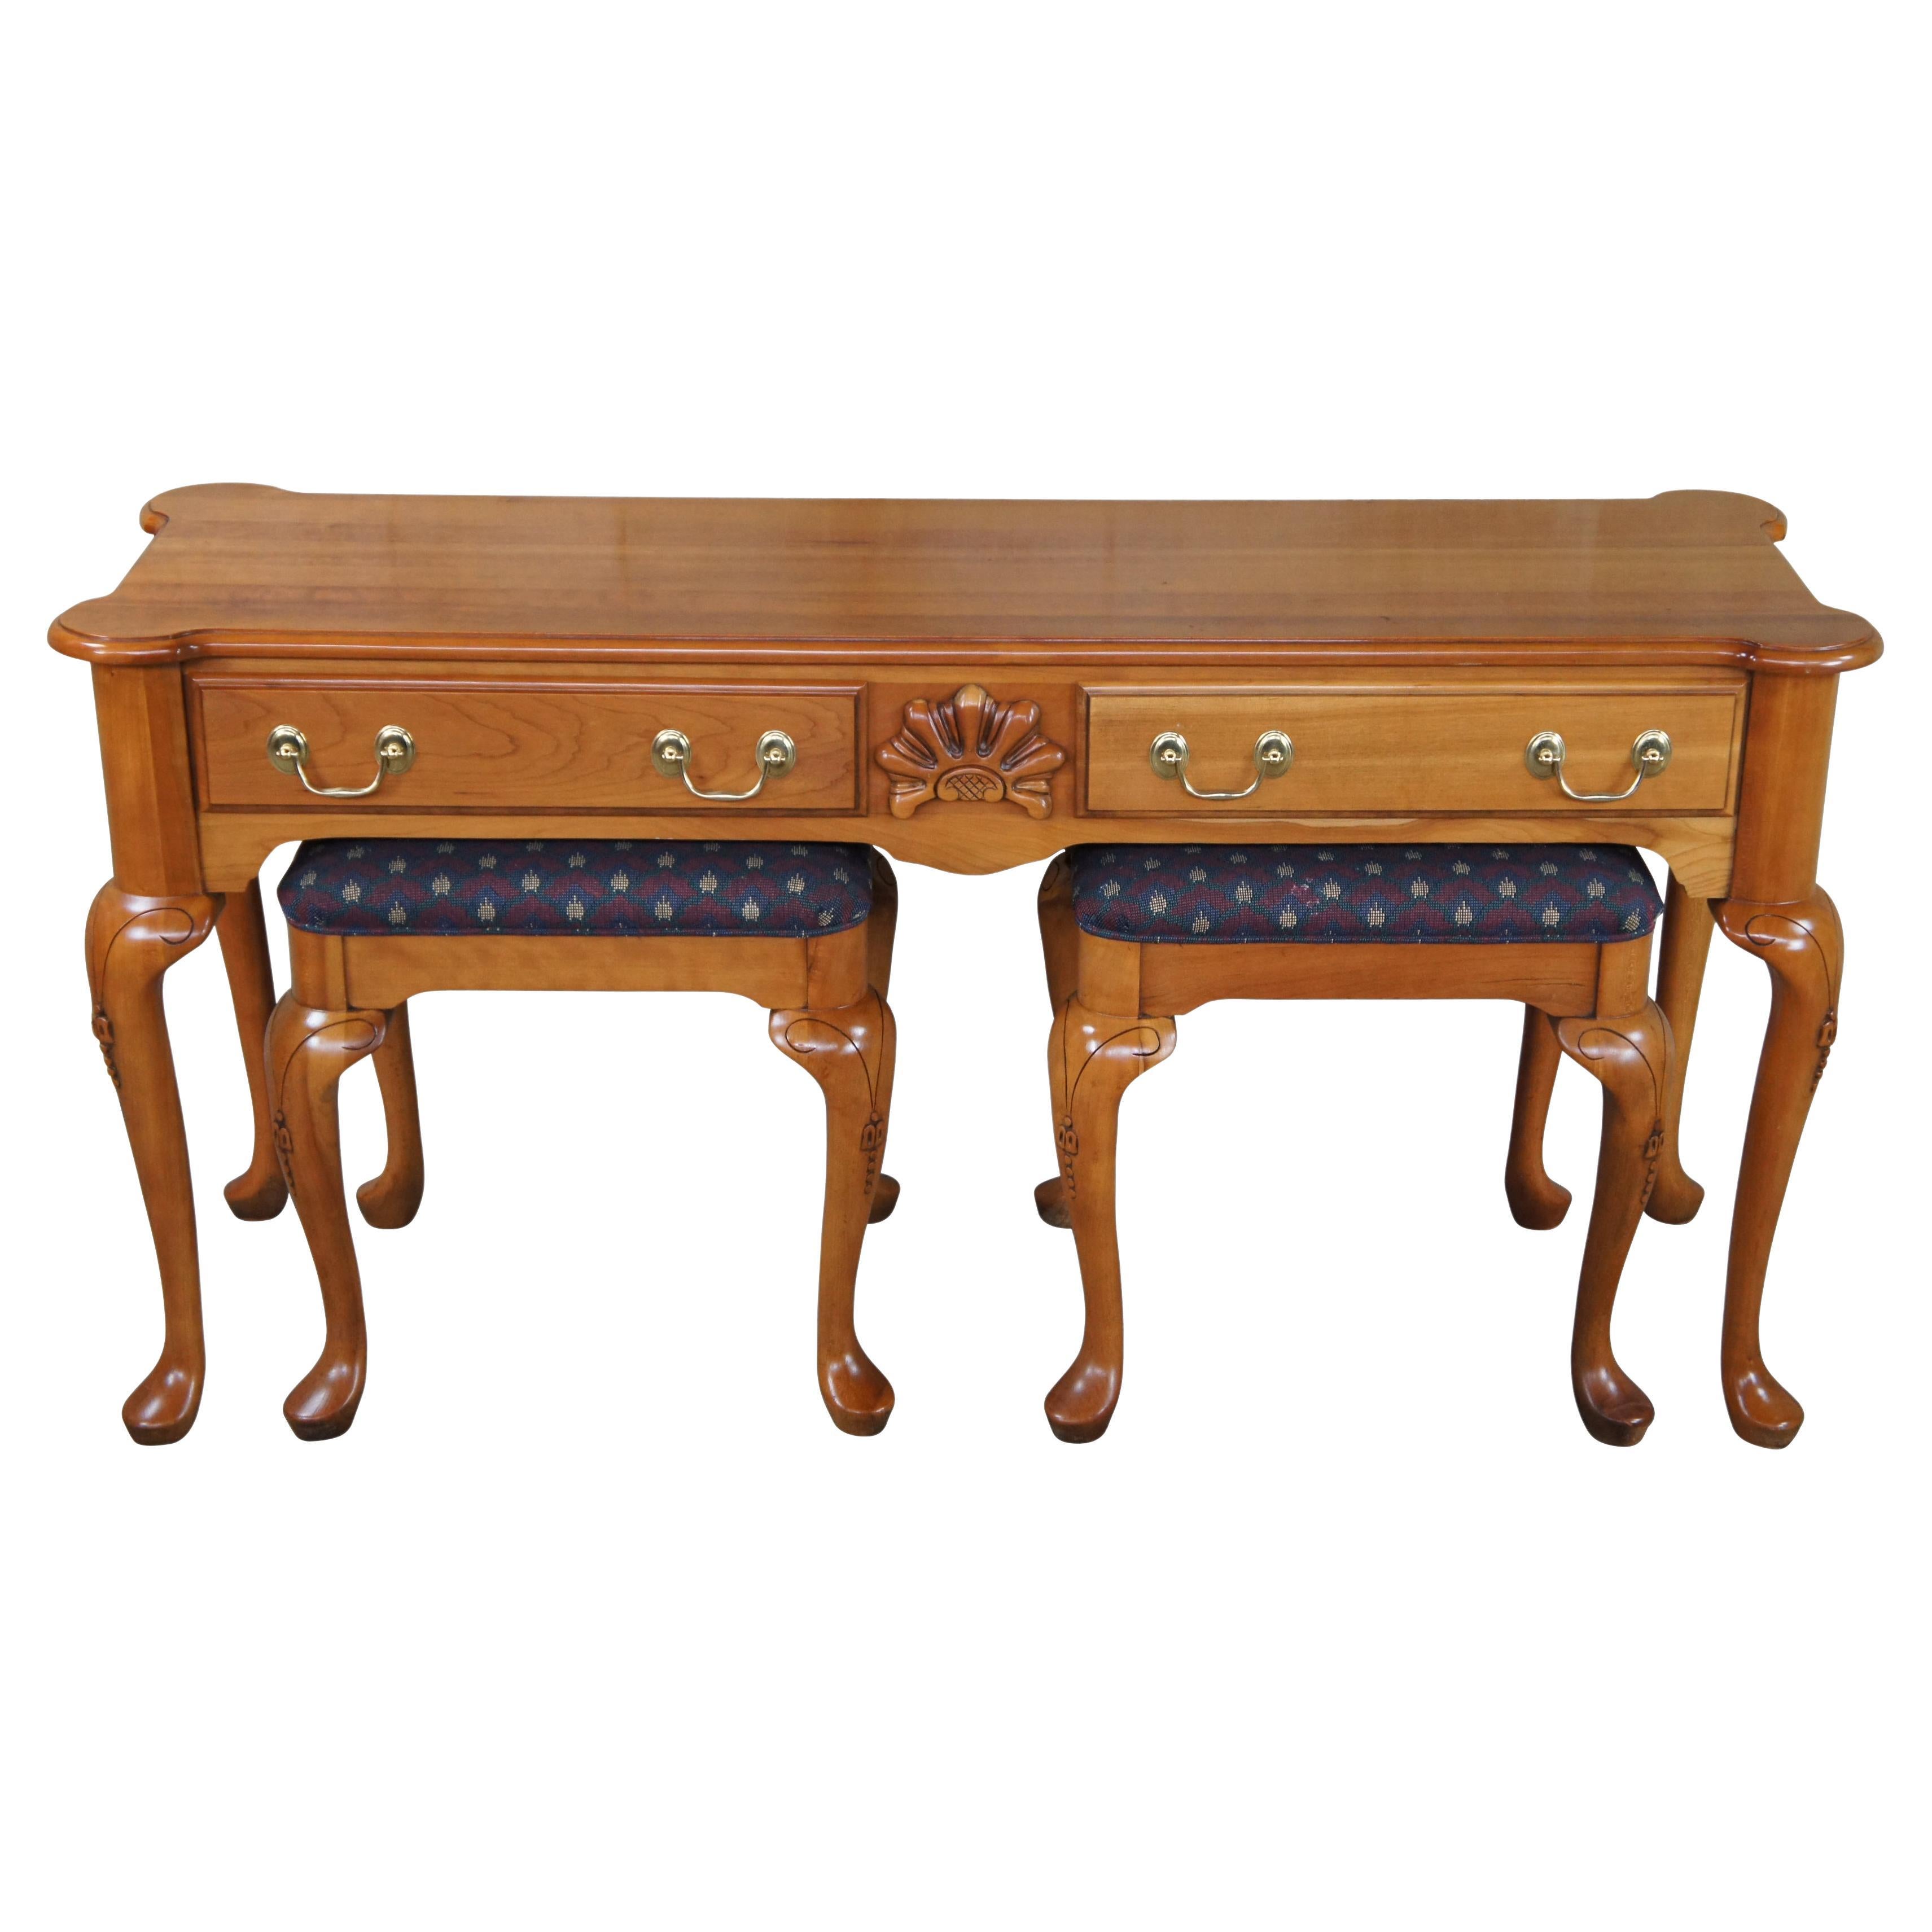 Harden Queen Anne Style Solid Cherry Sofa Console Table and Bench Stool Set  For Sale at 1stDibs | harden table, solid cherry by harden, queen anne  console table cherry finish